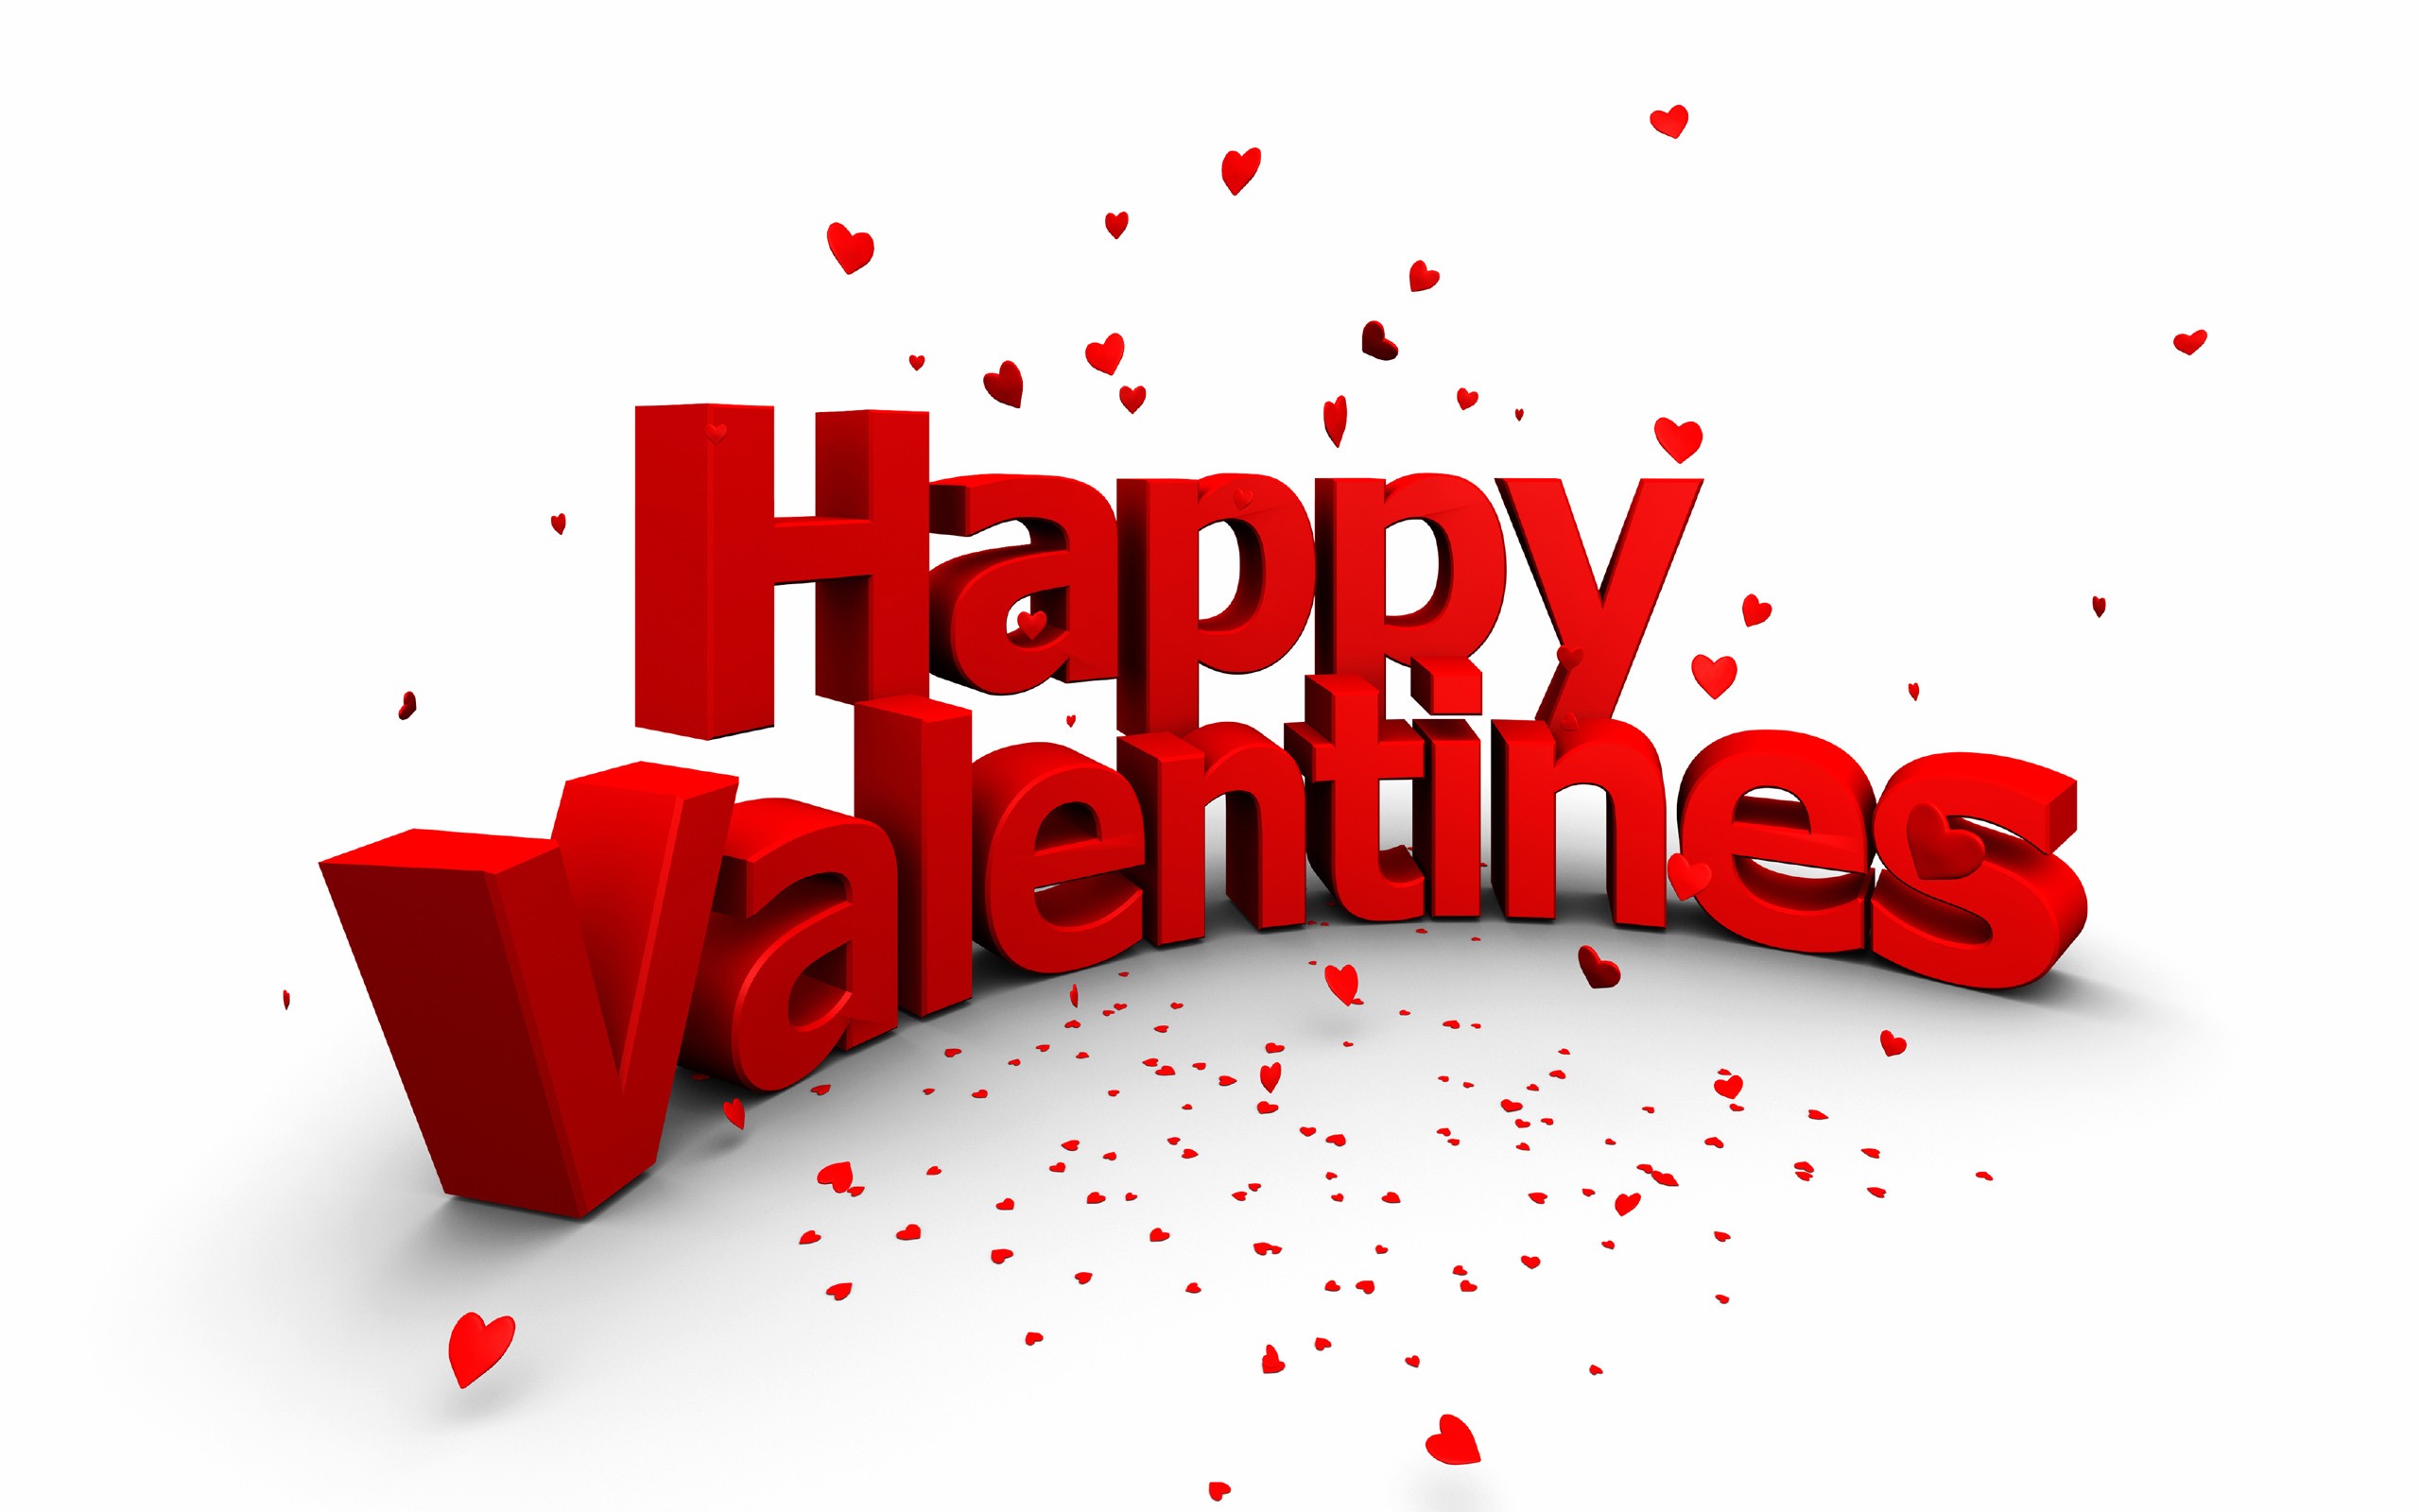 Top 10 Valentines Day Gifts Ideas 2014 | iAddSEO